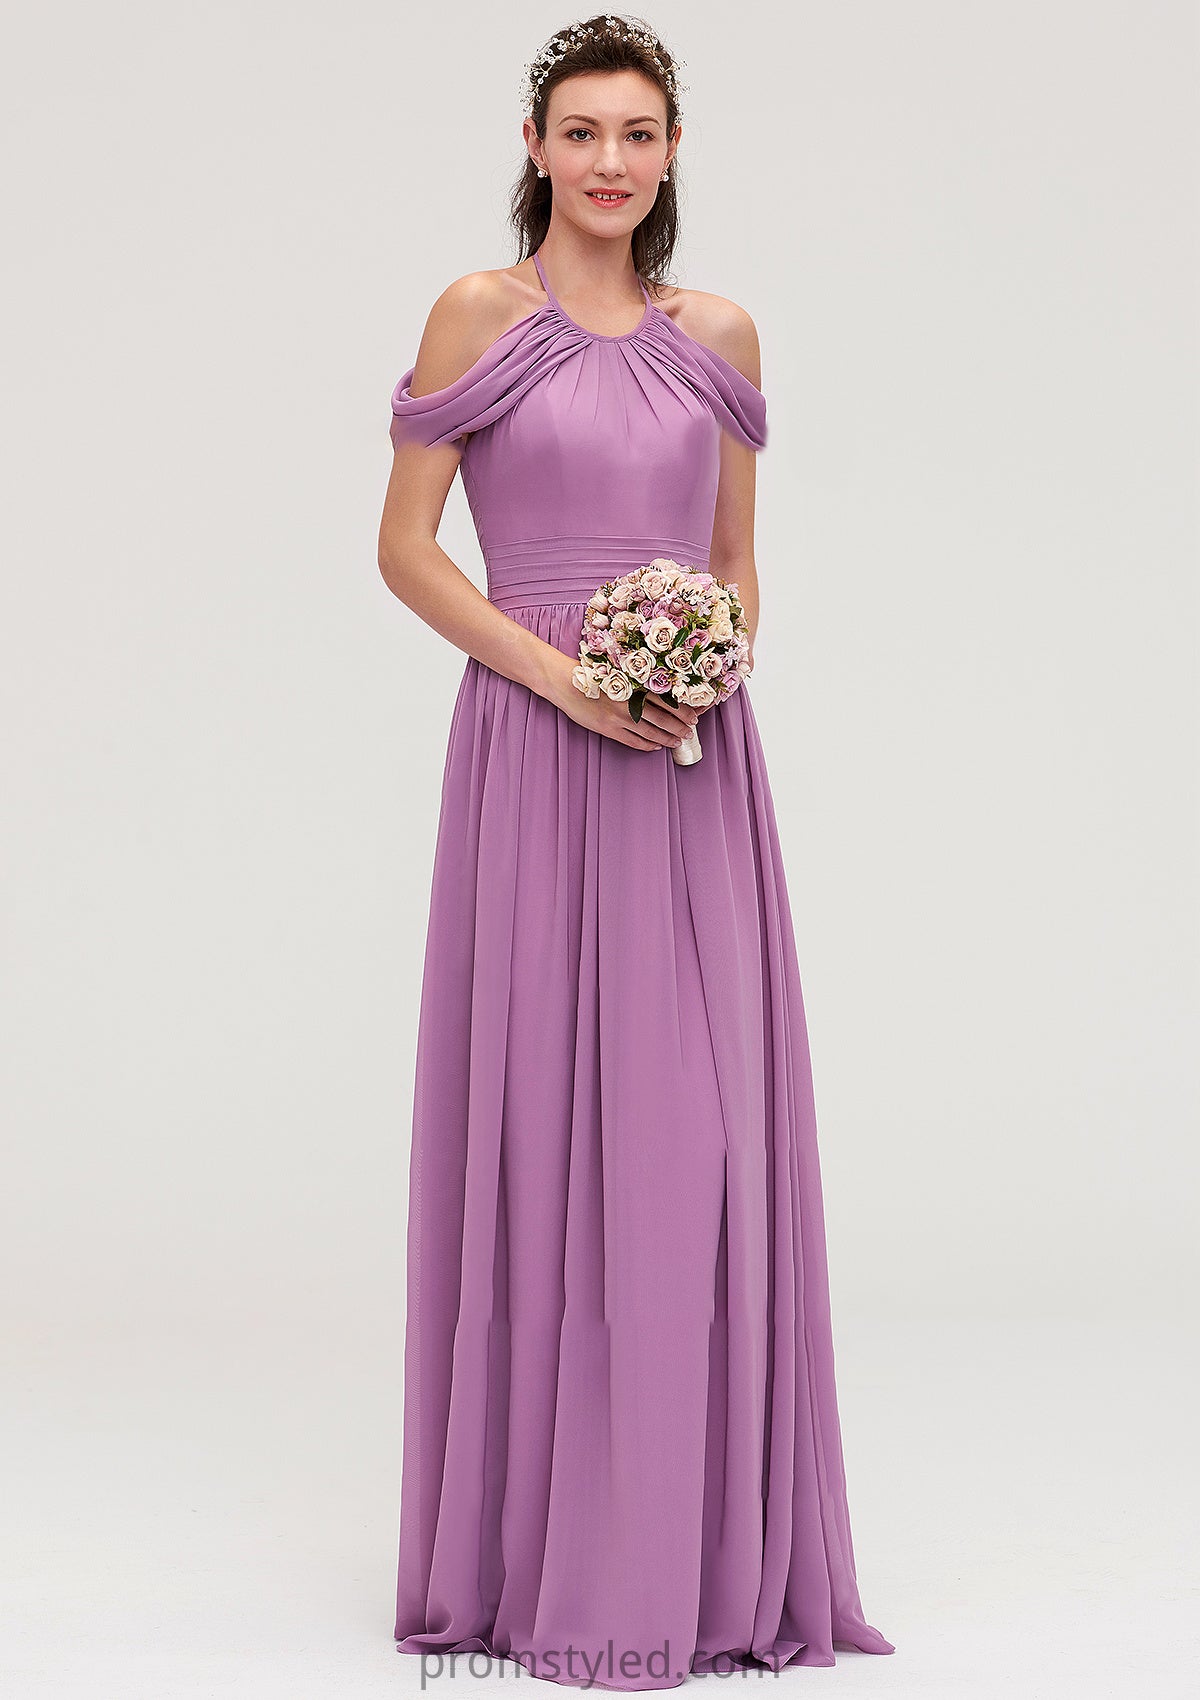 Scoop Neck Sleeveless Chiffon A-line/Princess Long/Floor-Length Bridesmaid Dresseses With Pleated Katherine HLP0025461